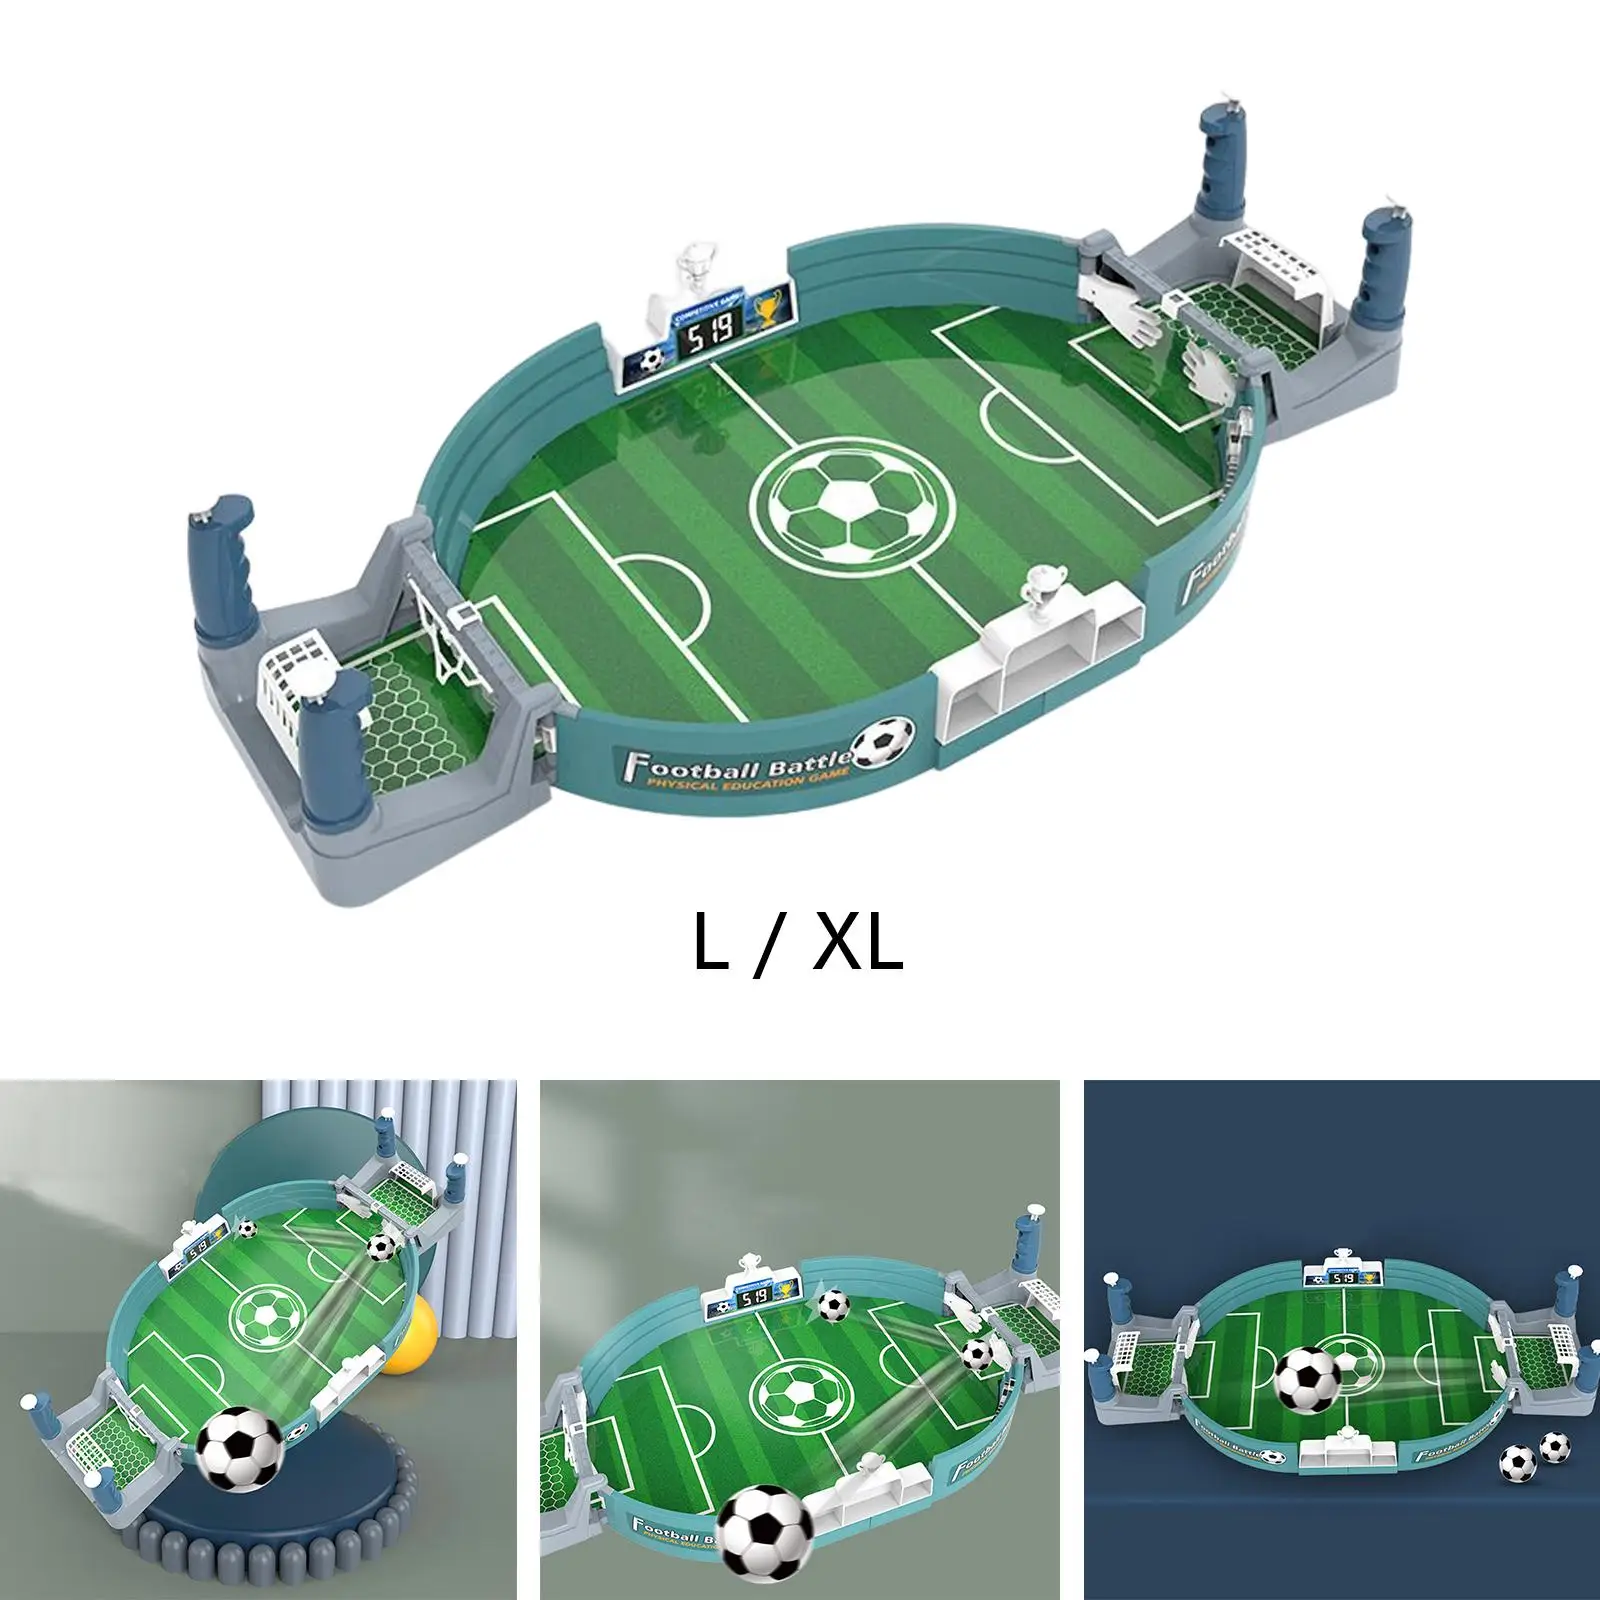 Interactive Tabletop Football Games Mini Tabletop Football Soccer Pinball Games Funny Football Game for Family Girls Boys